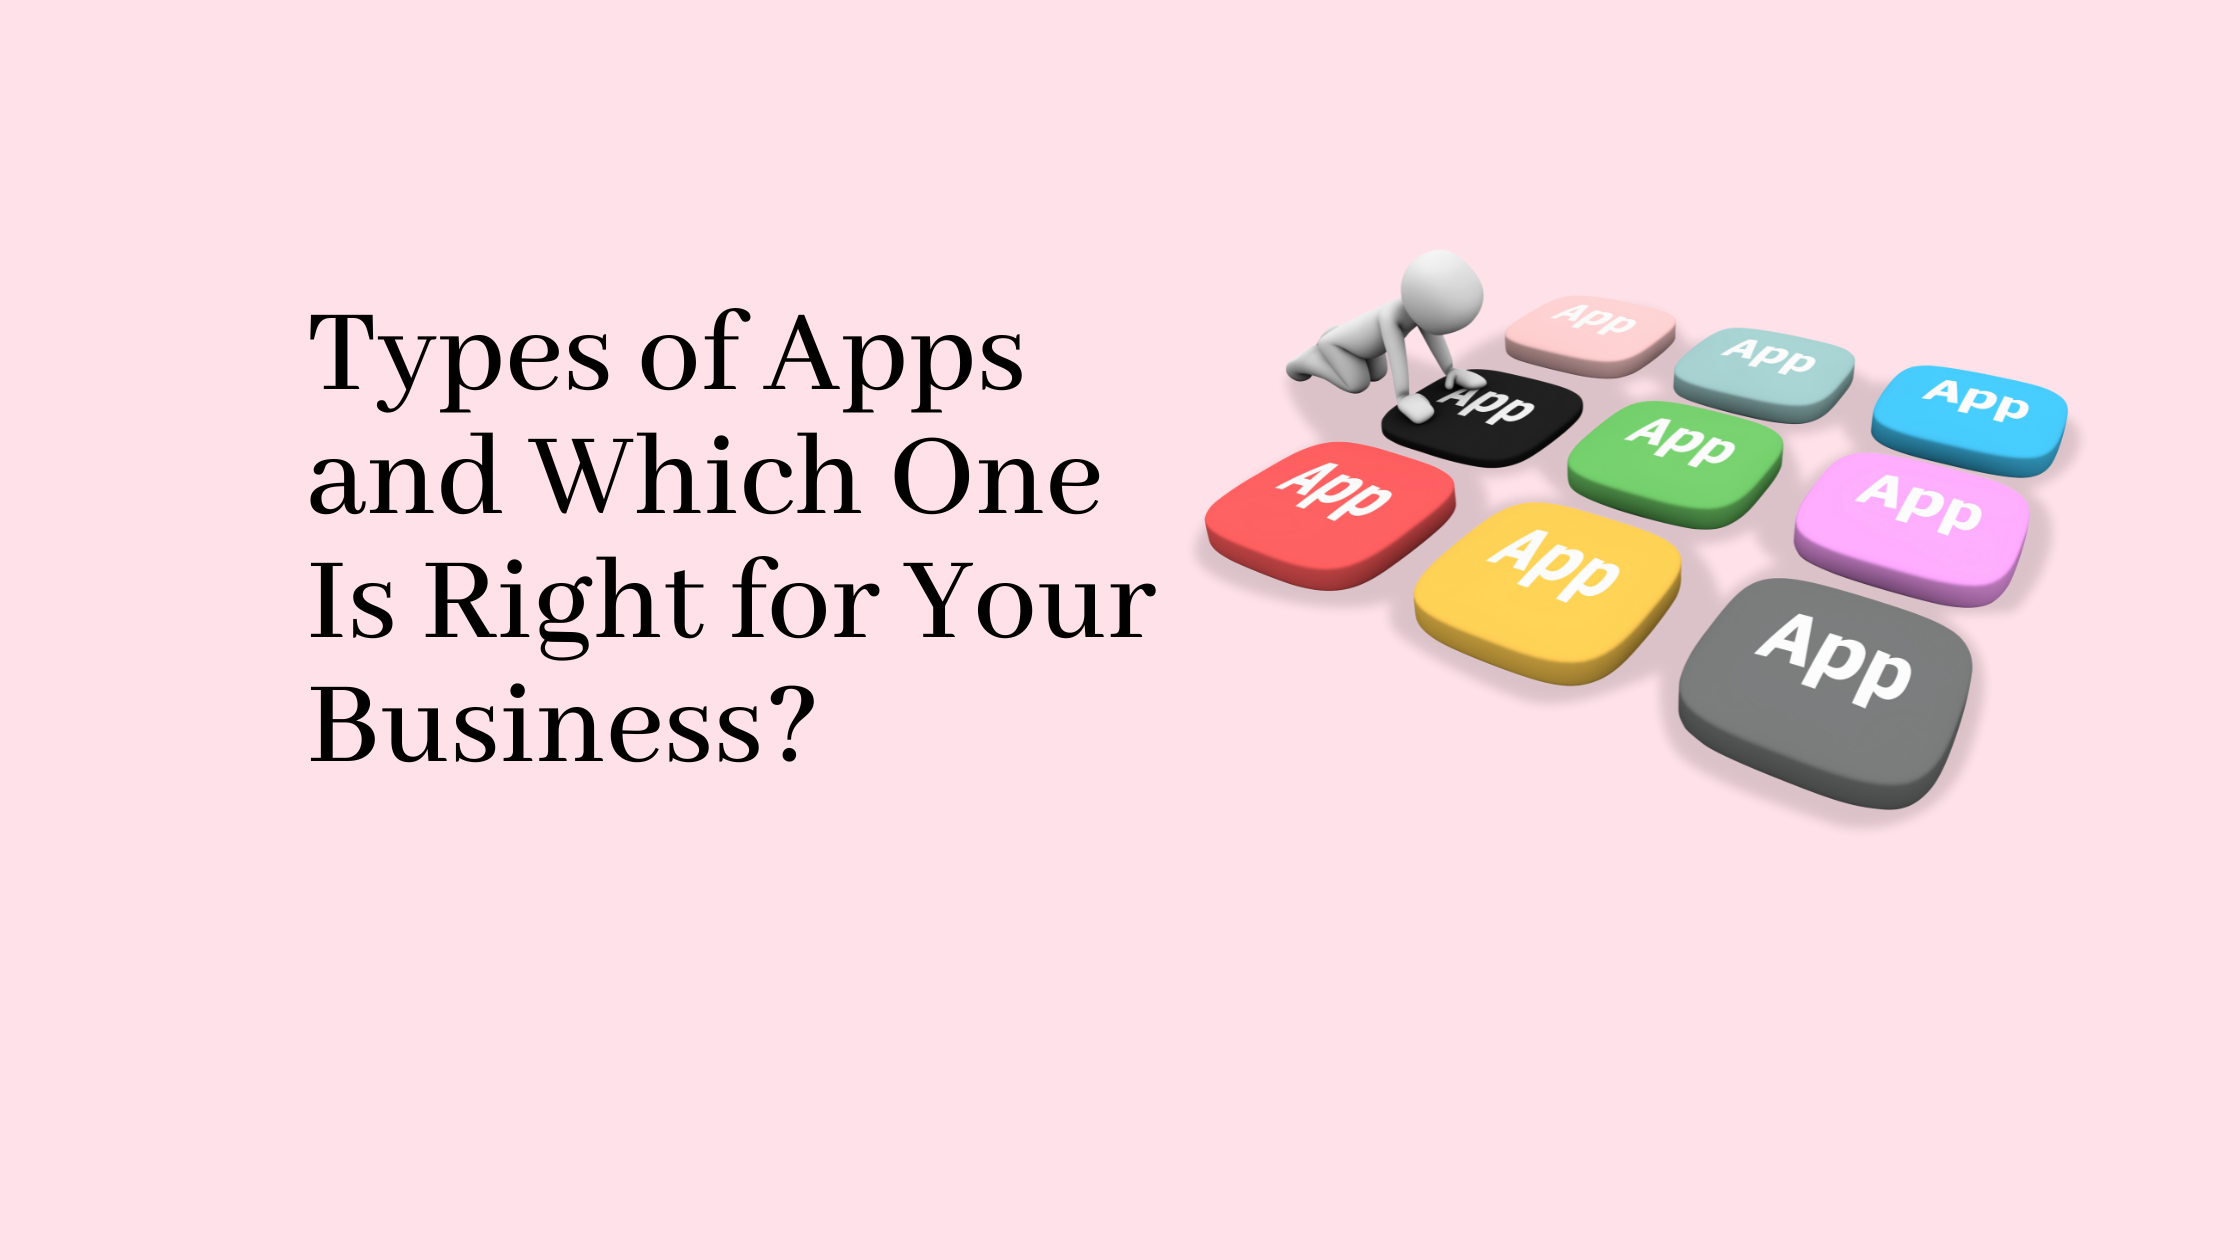 Types of Apps